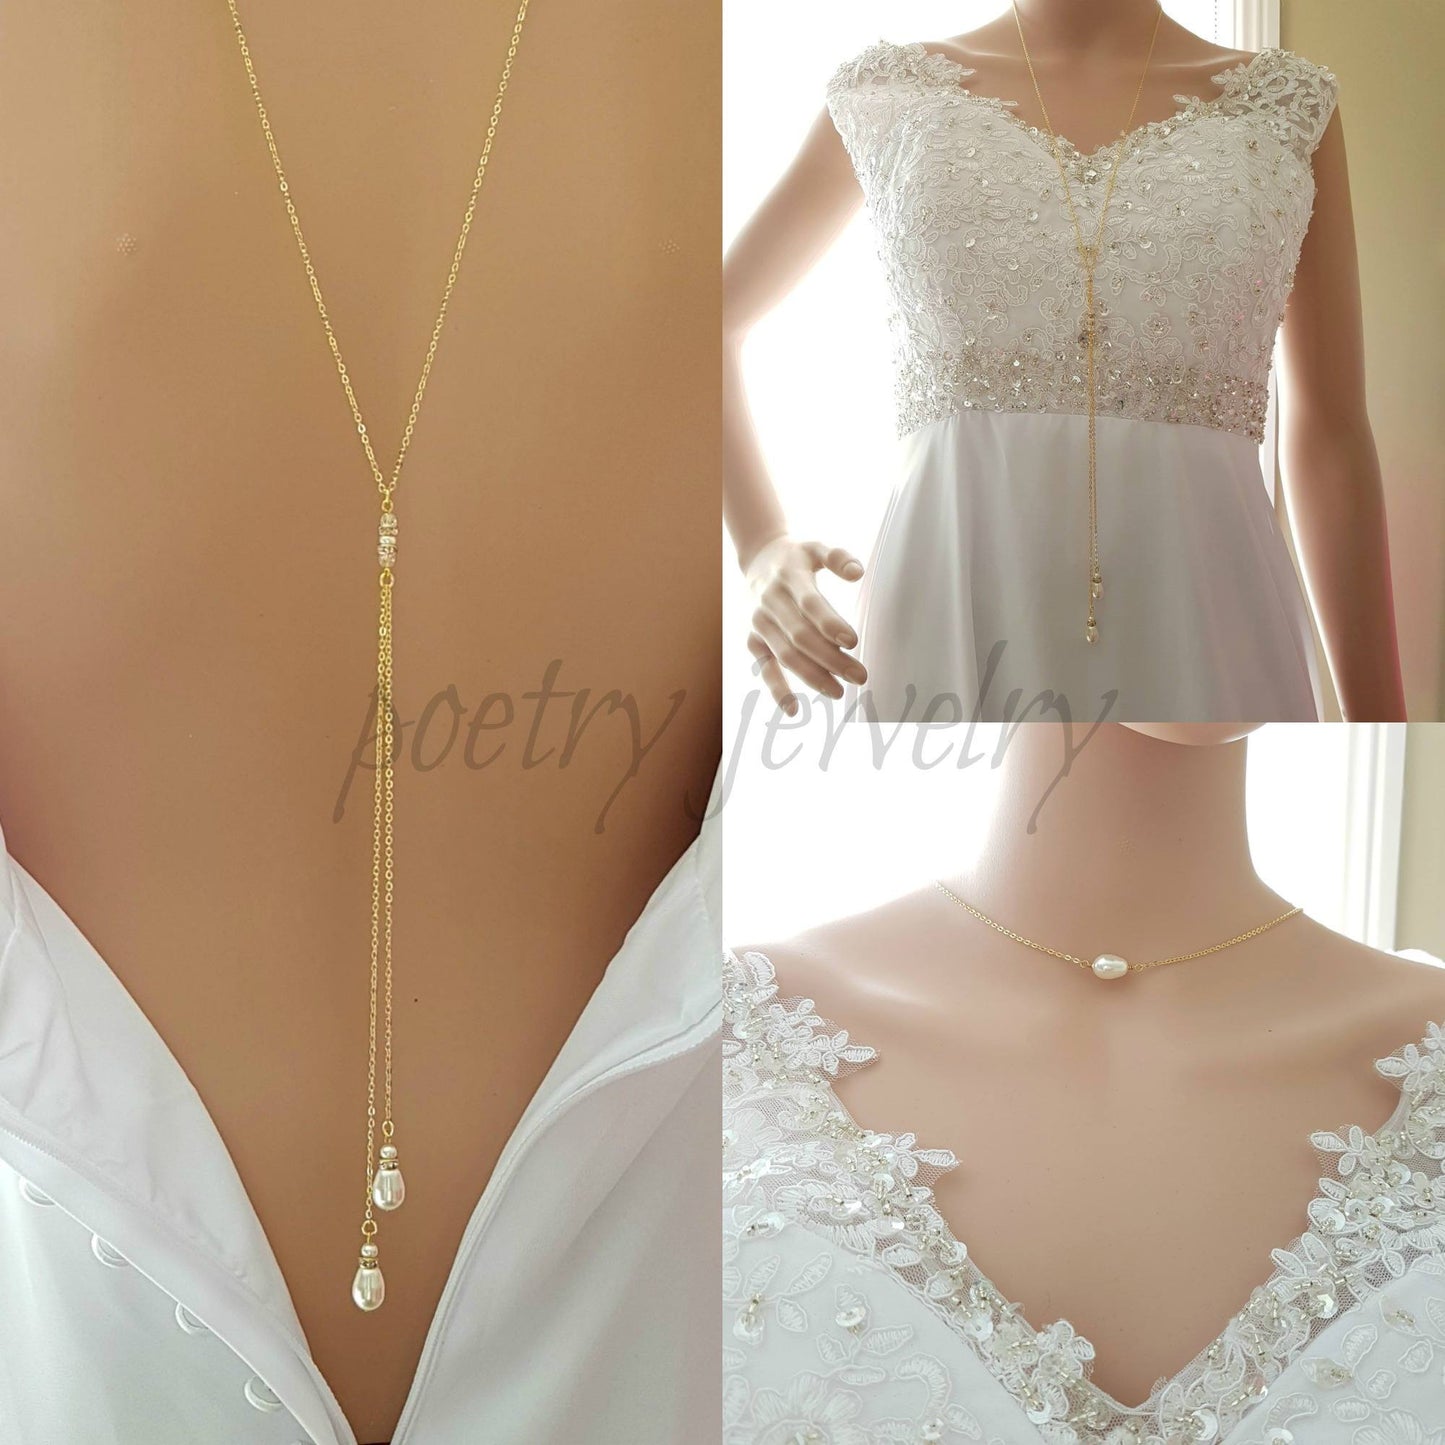 Gold Back Necklace With Chain & Pearl Drops-June - PoetryDesigns